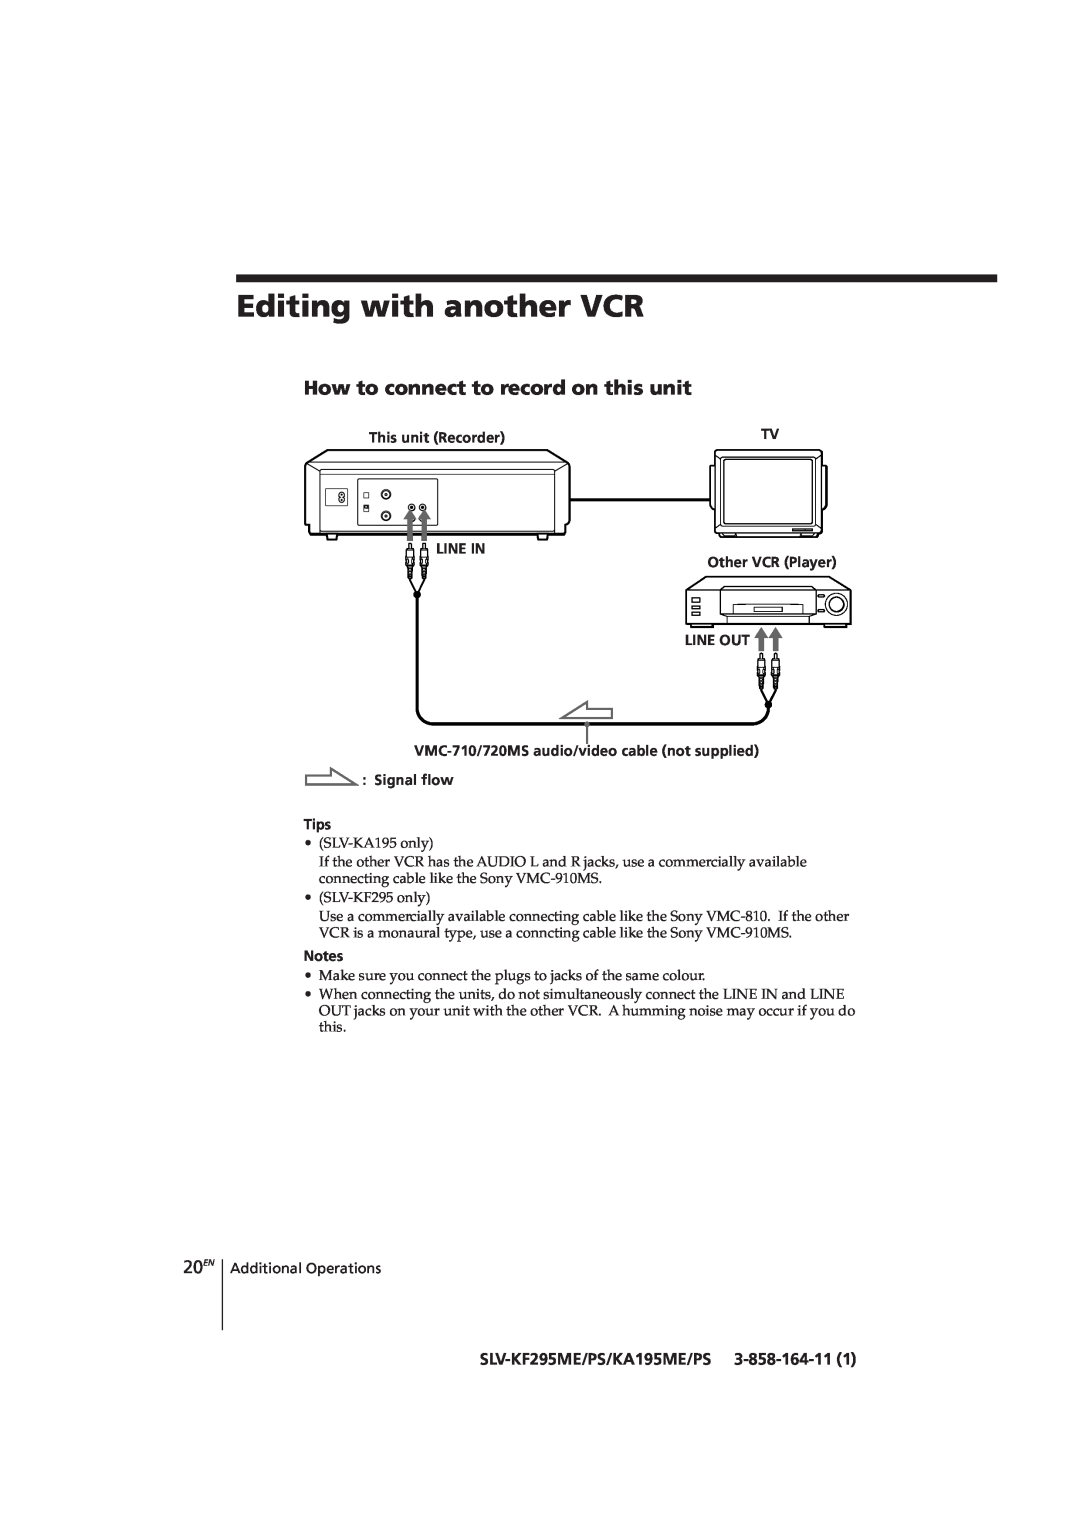 Sony SLV-KF295CH manual Editing with another VCR, How to connect to record on this unit, 20EN, SLV-KF295ME/PS/KA195ME/PS 